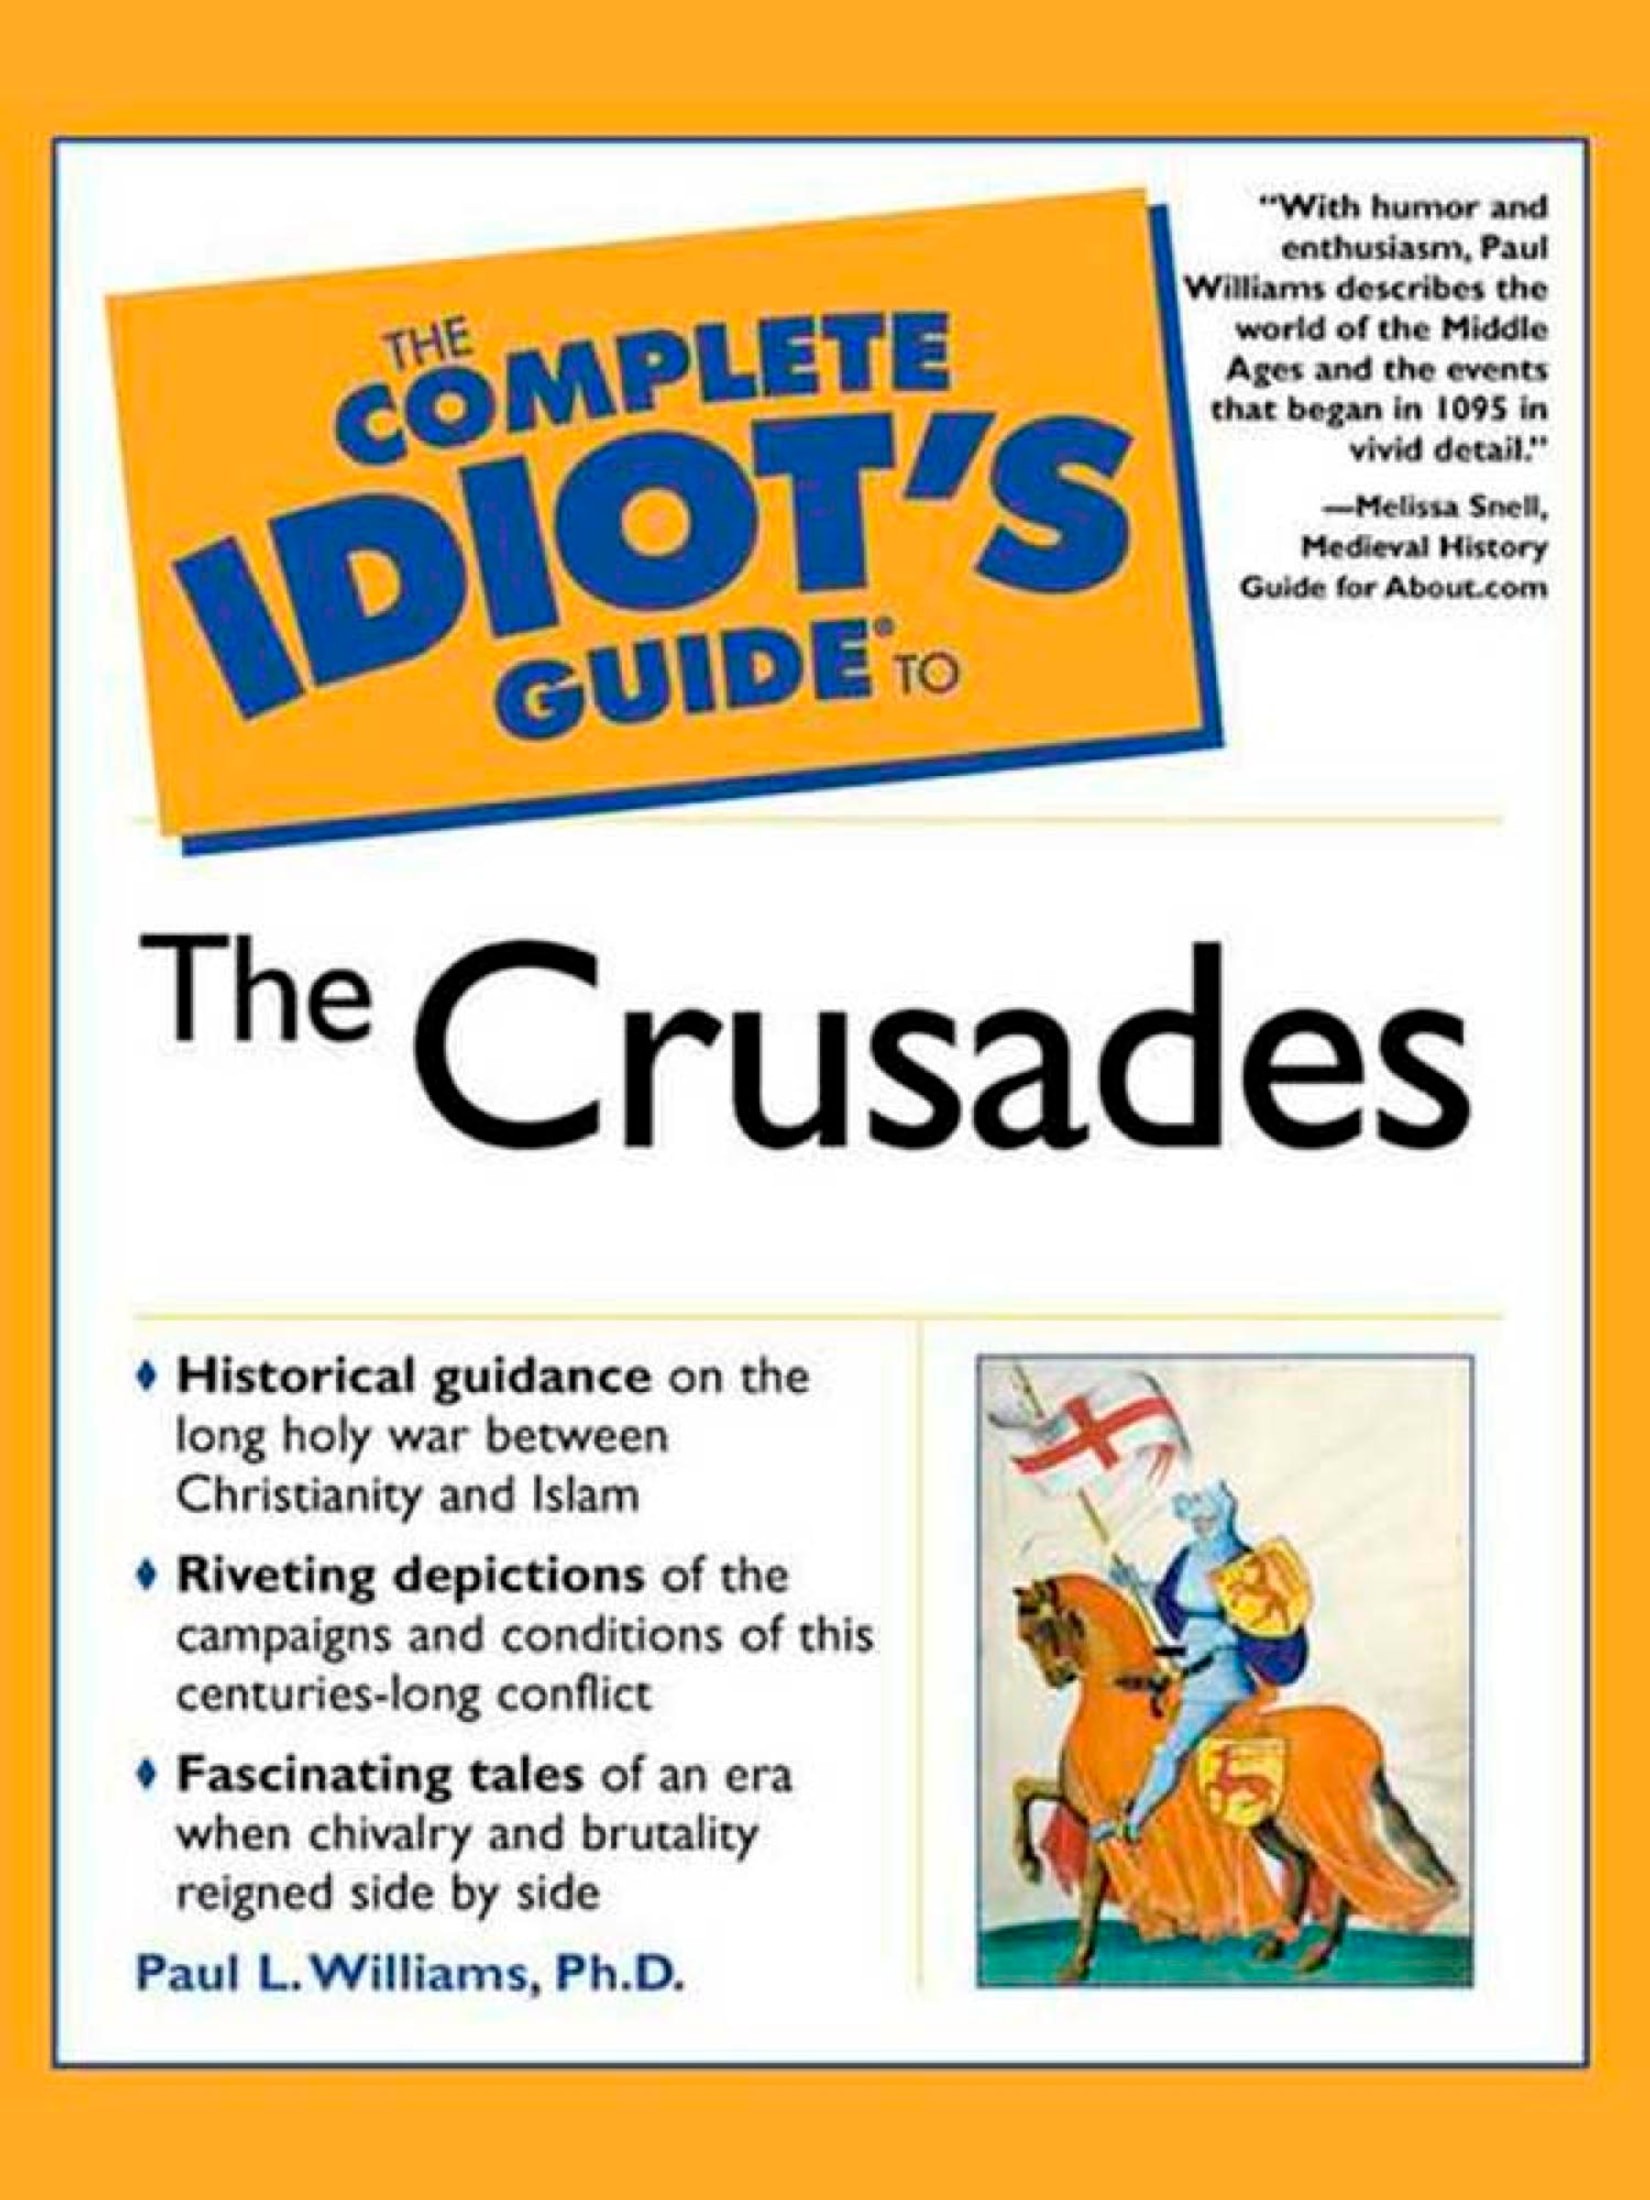 The Complete Idiot's Guide to the Crusades